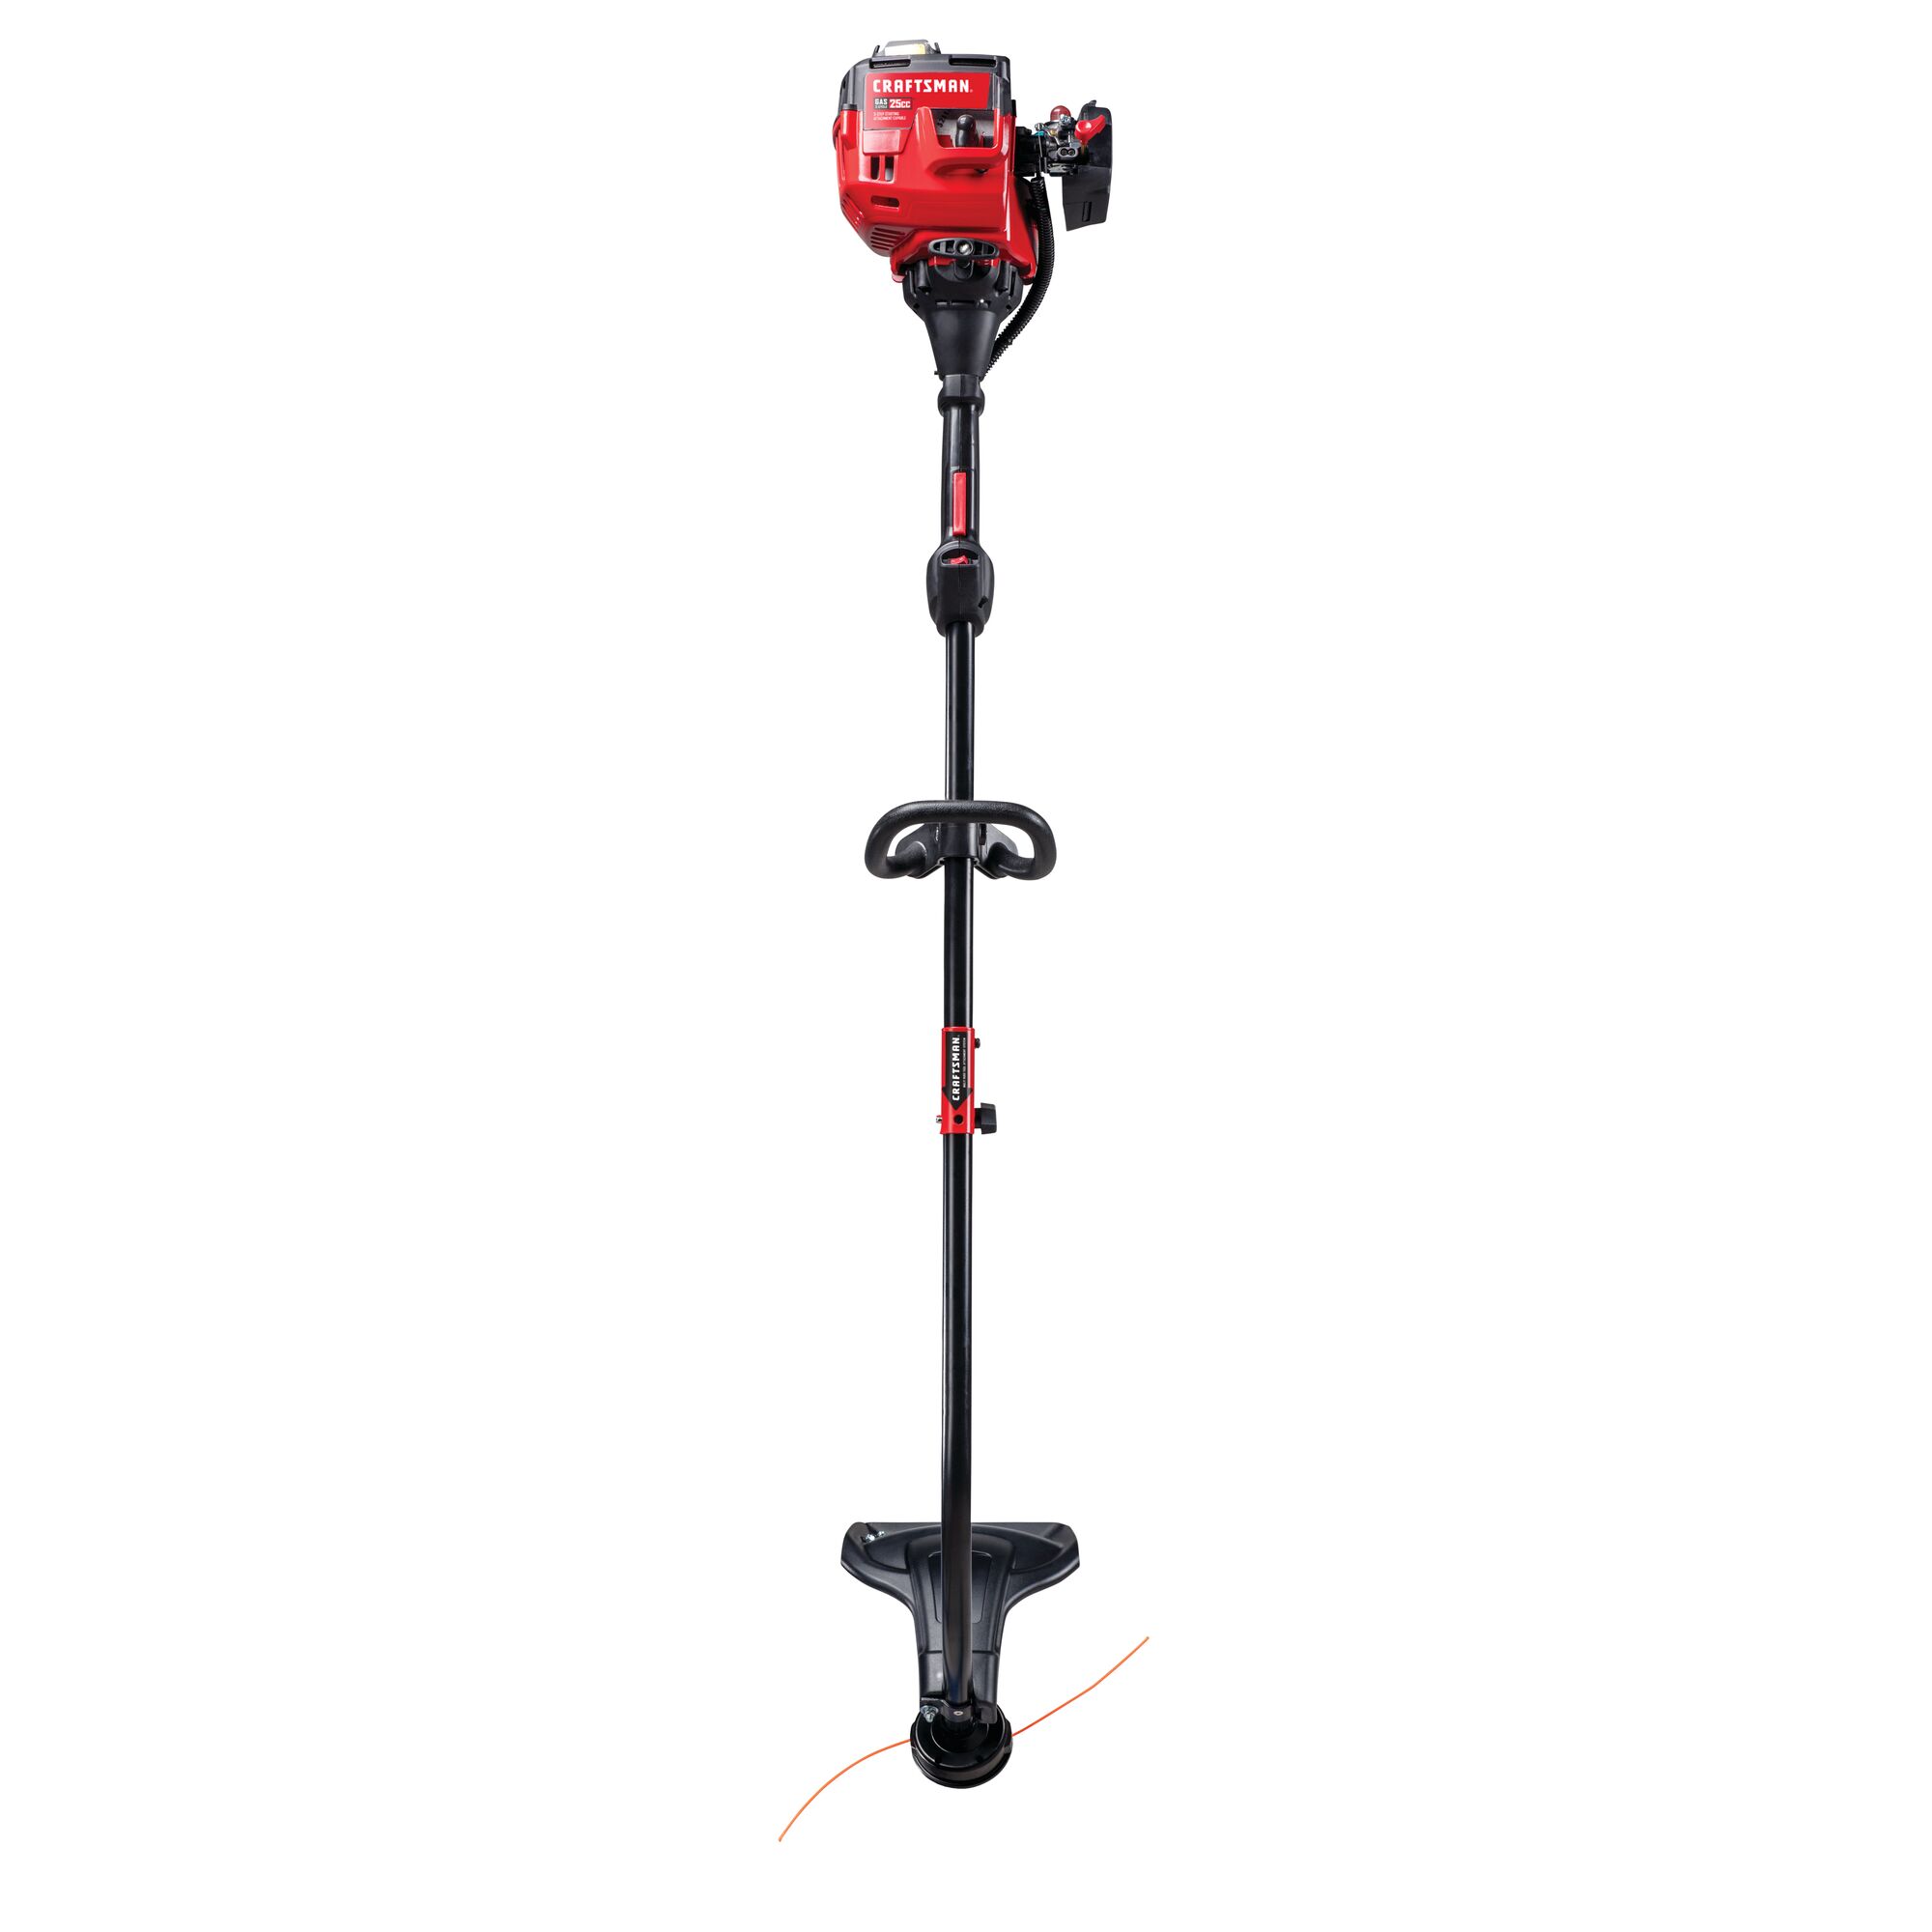 2 Cycle 17 inch attachment capable curved shaft gas weedwacker trimmer.